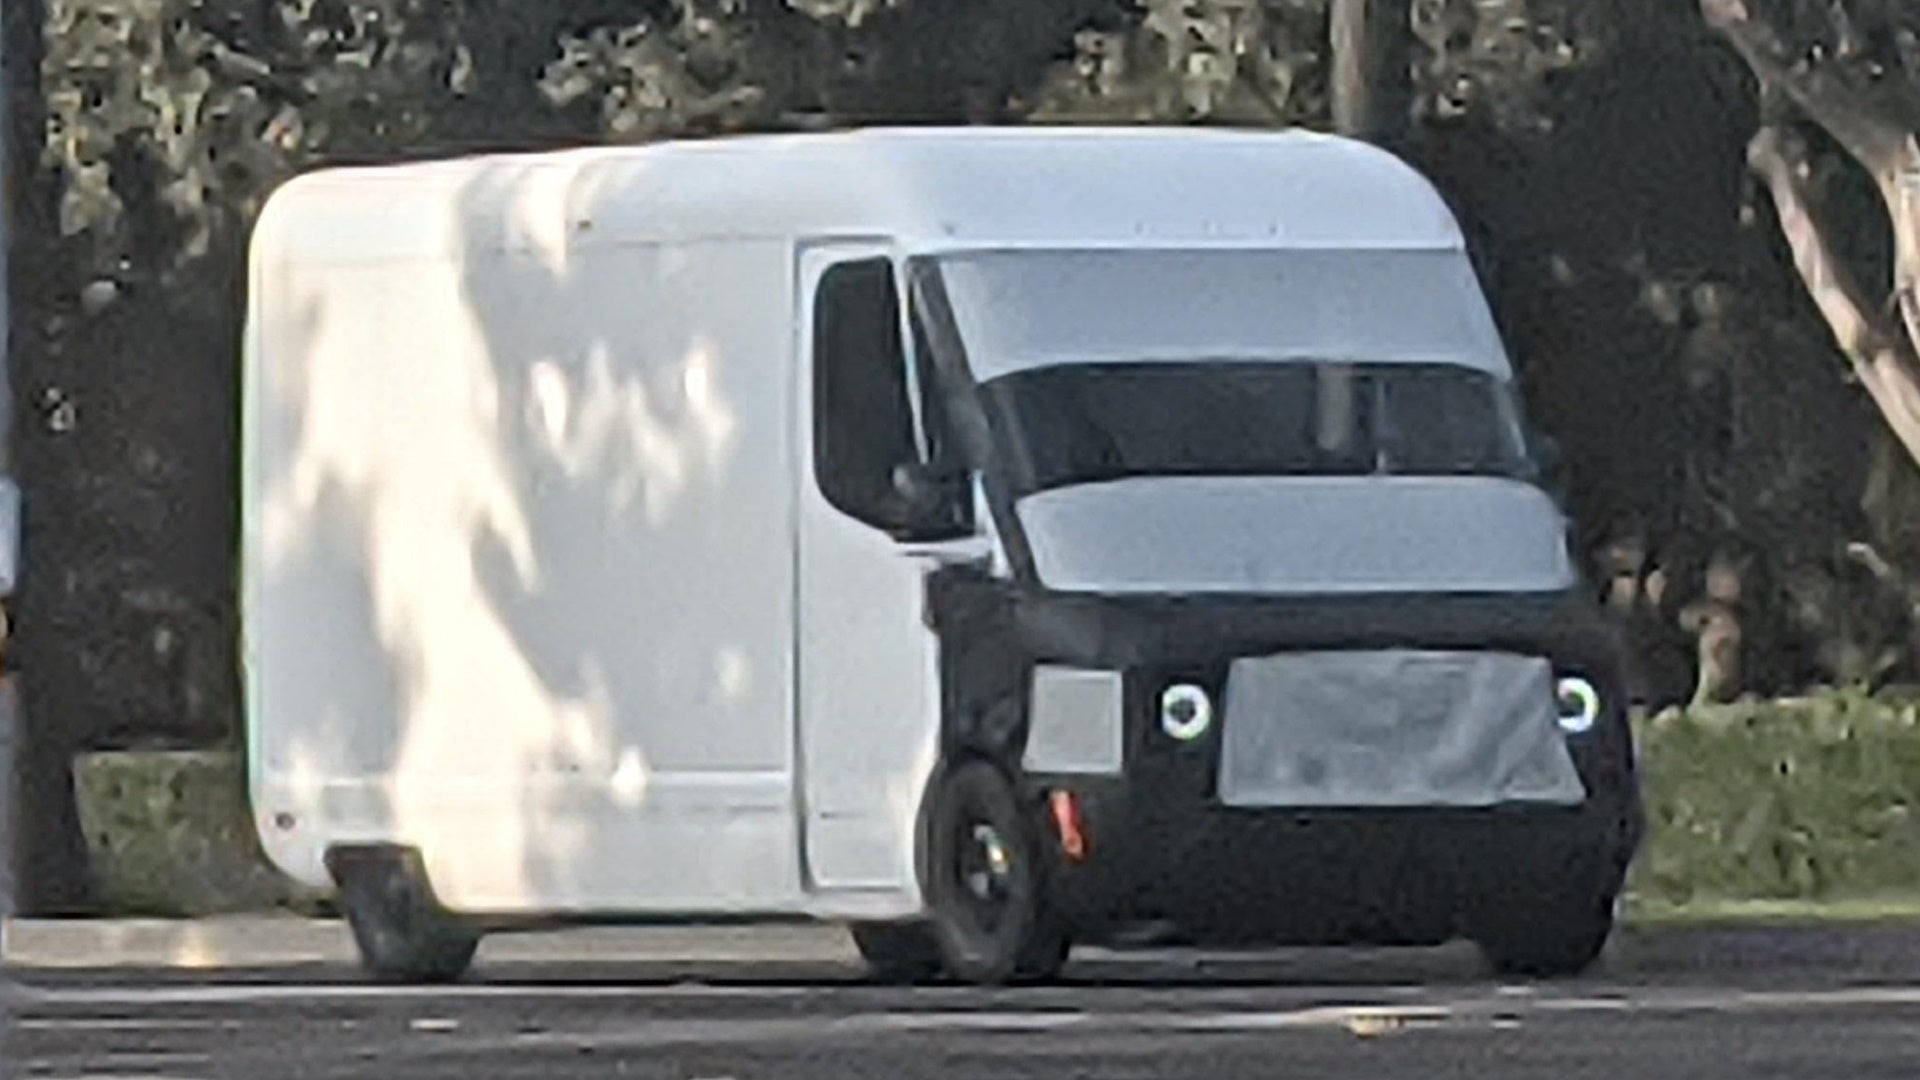 Rivian’s Amazon Delivery Vans Really Exist, And These Photos Show One Testing in Public